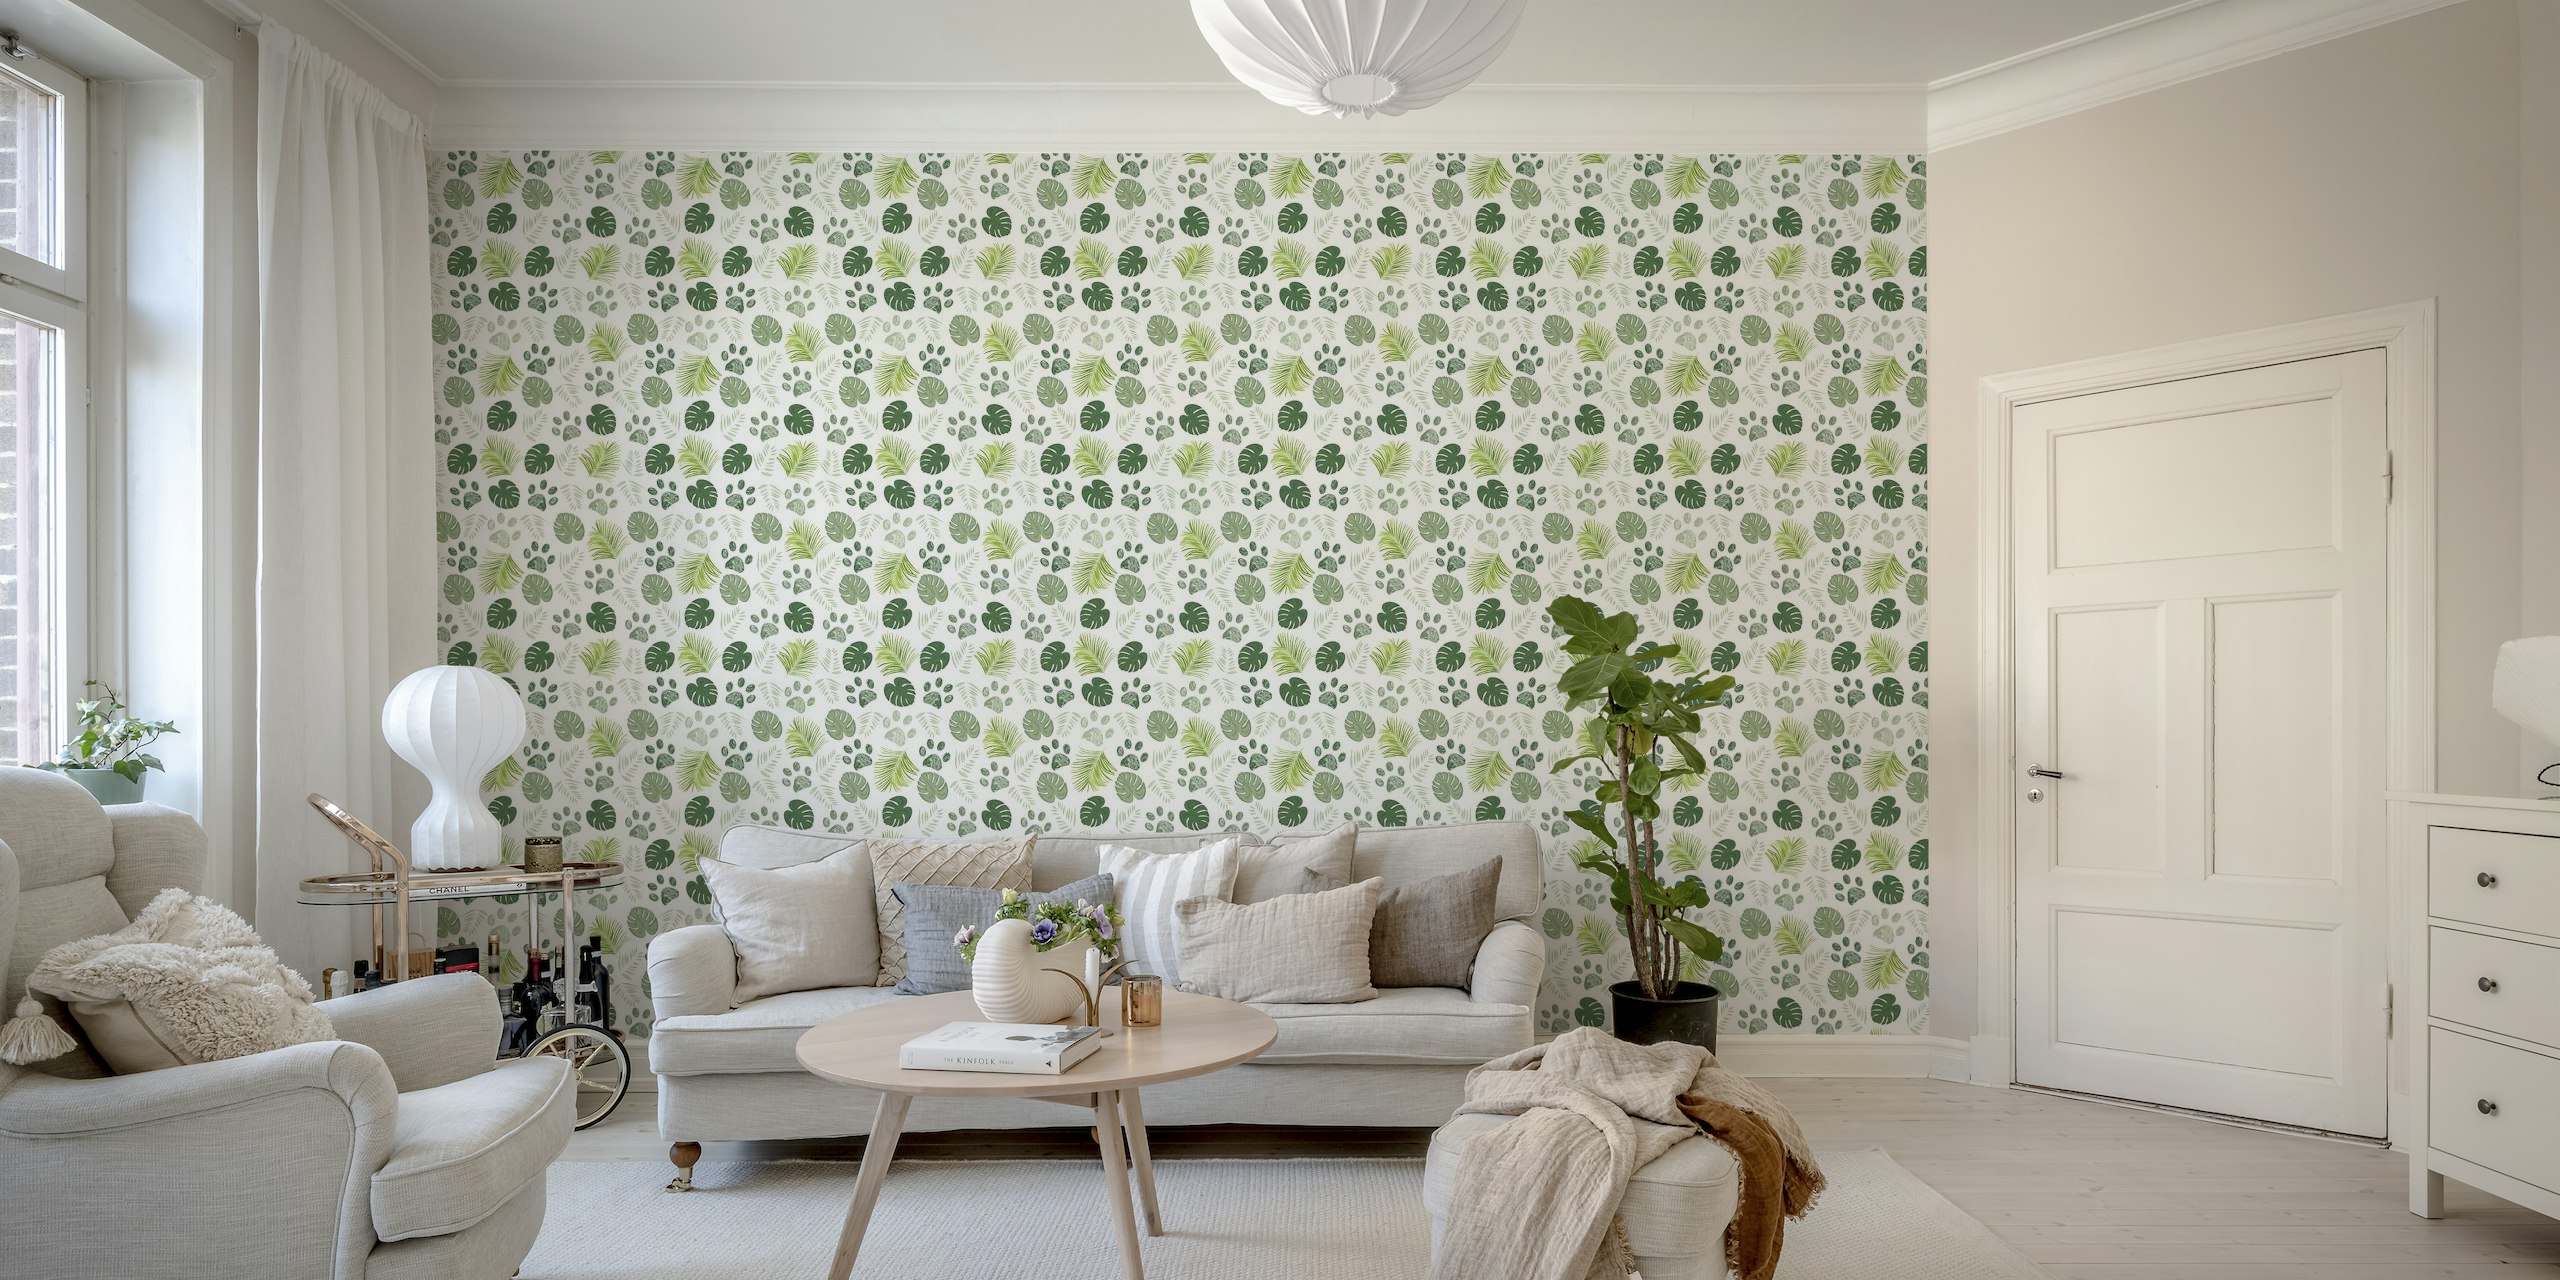 Paw print with palm leaves wallpaper